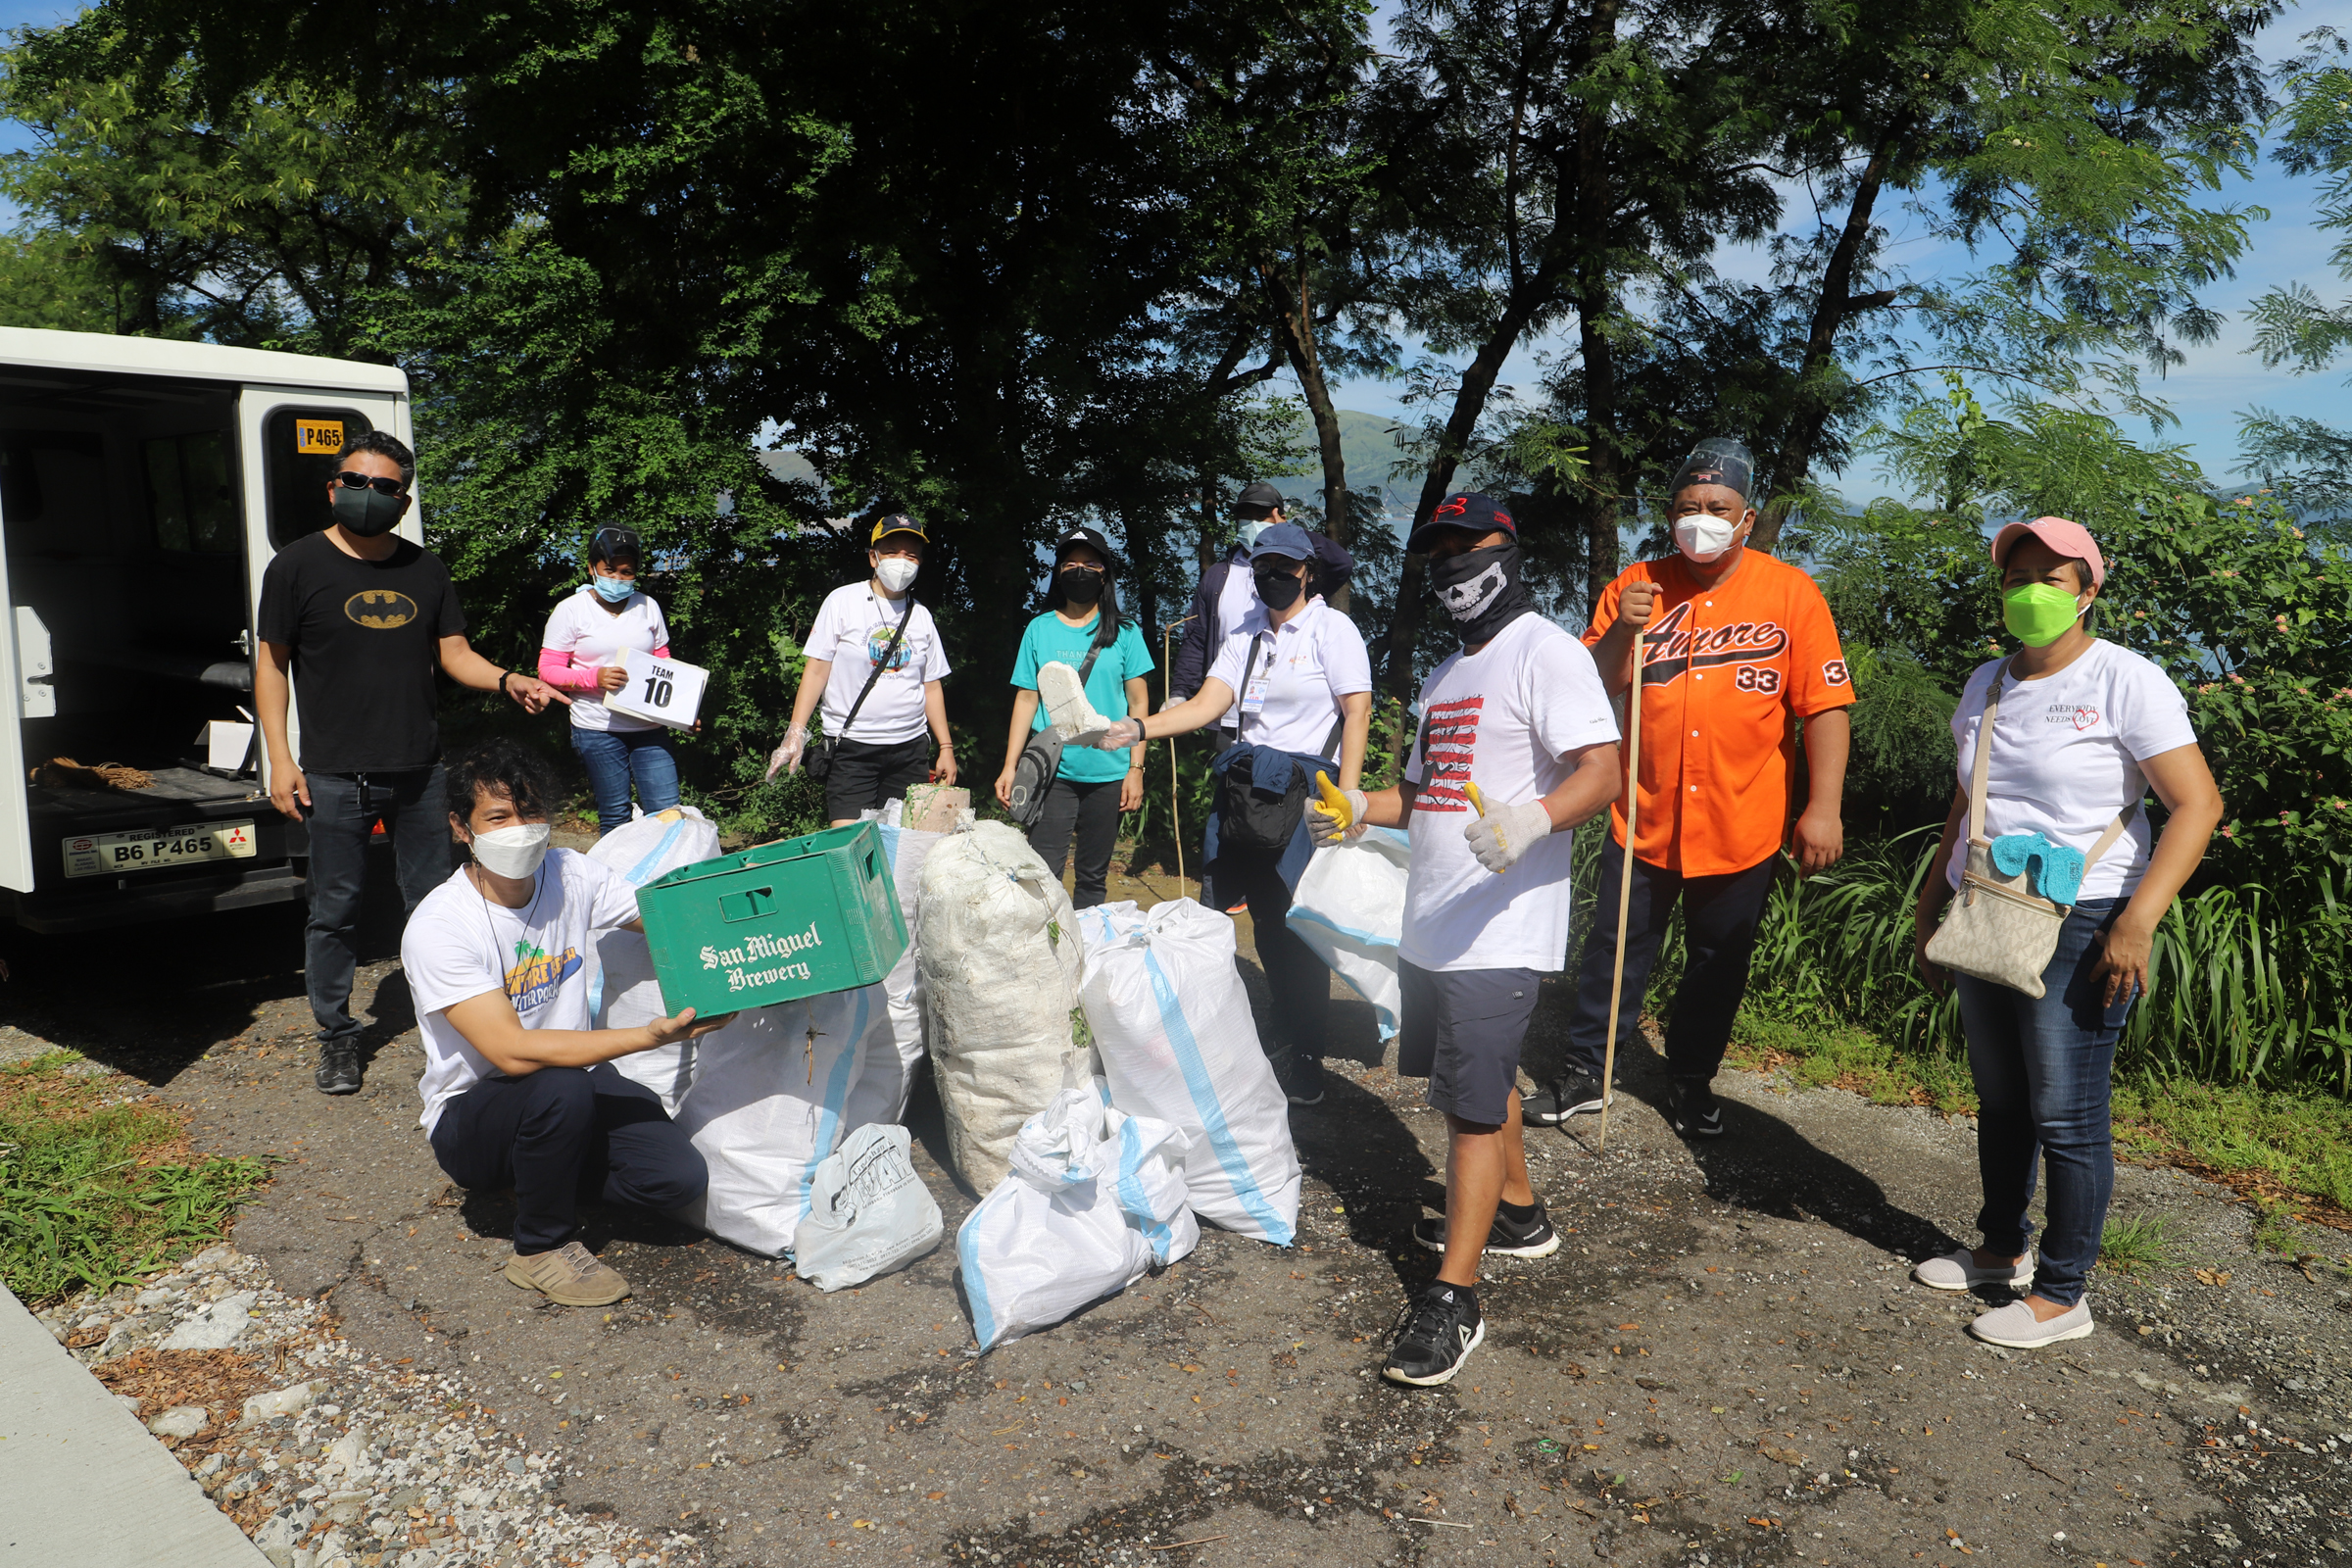 Subic Bay Freeport to join Earth Day celebration after a 2-year pause